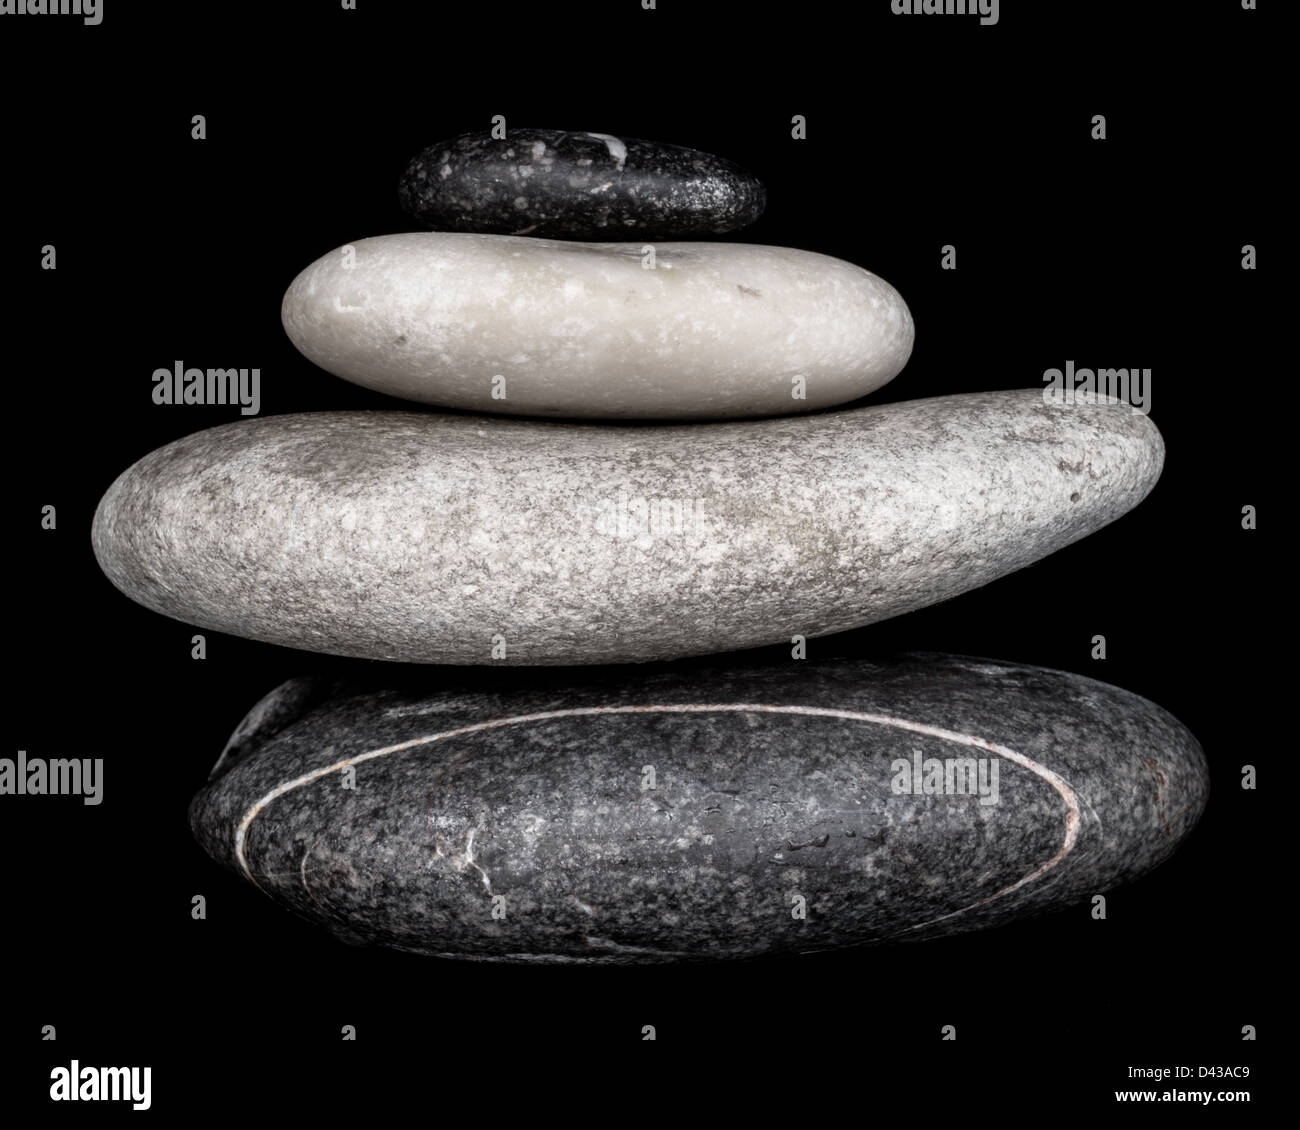 Black & White Close Up Image of a Stack of Four Pebbles on a Black Background. Stock Photo